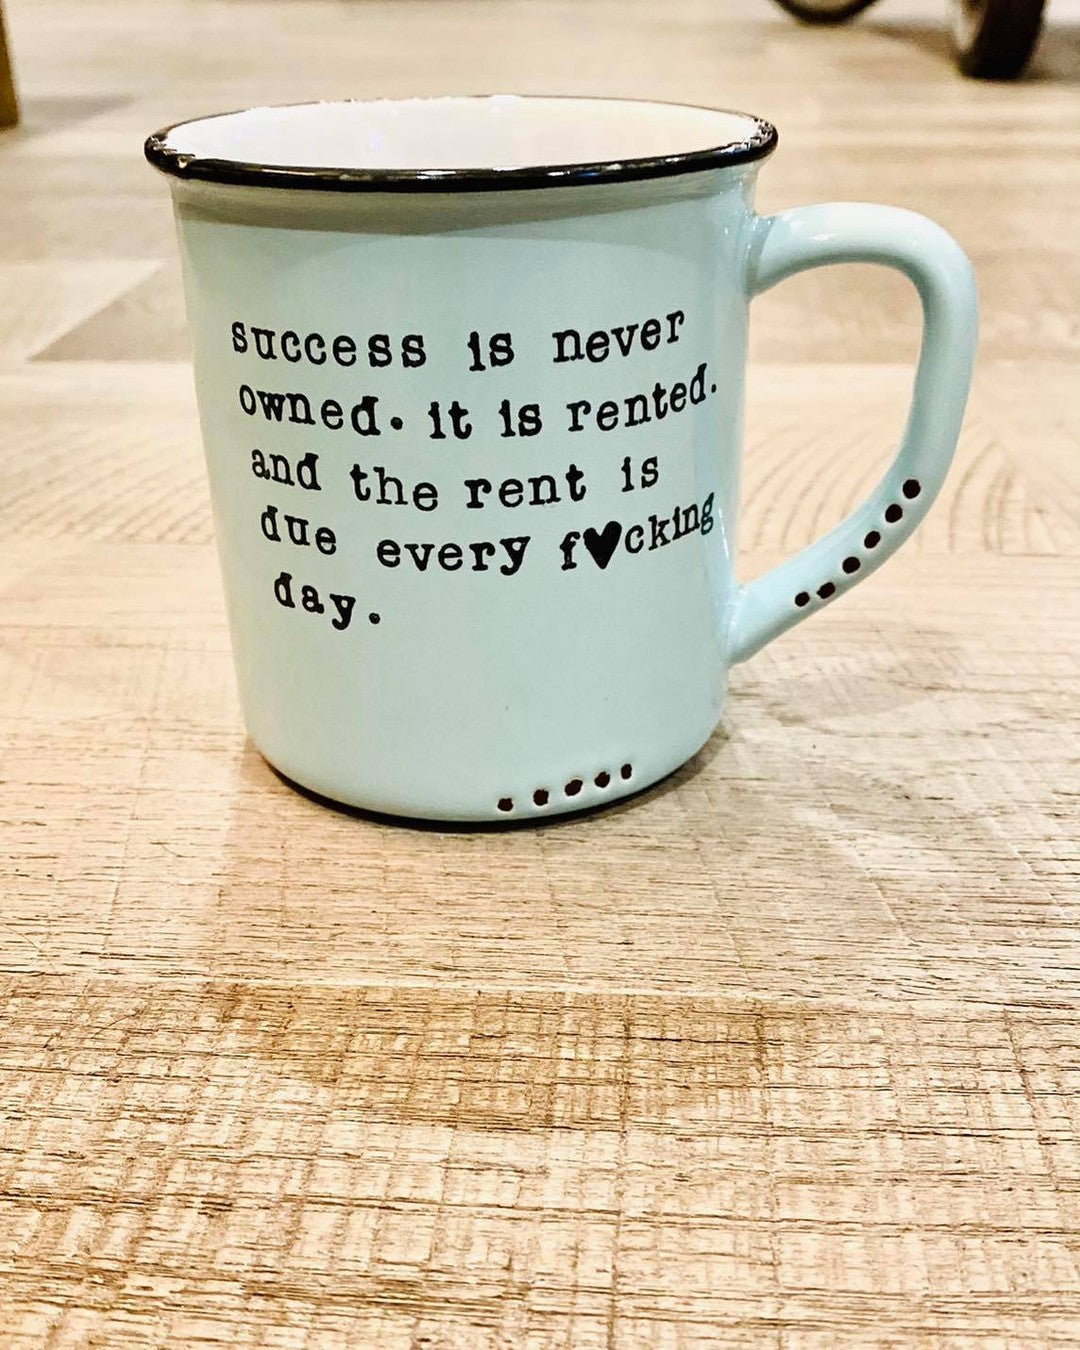 Success is never owned. It is rented. And the rent is due every fucking day.